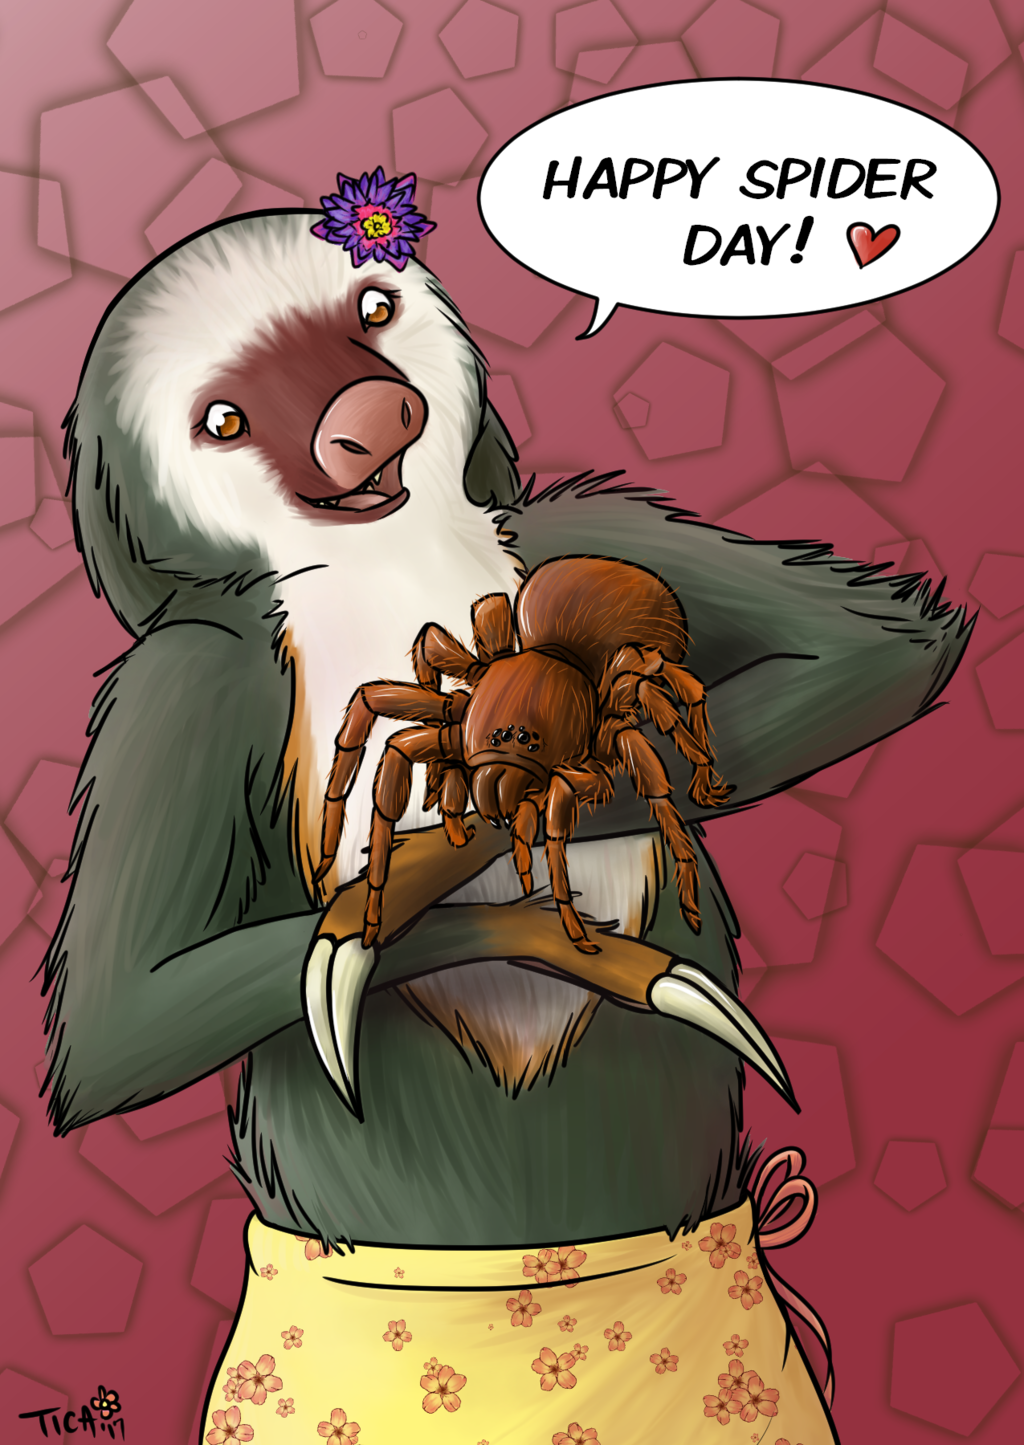 Happy (belated) Spider Day!